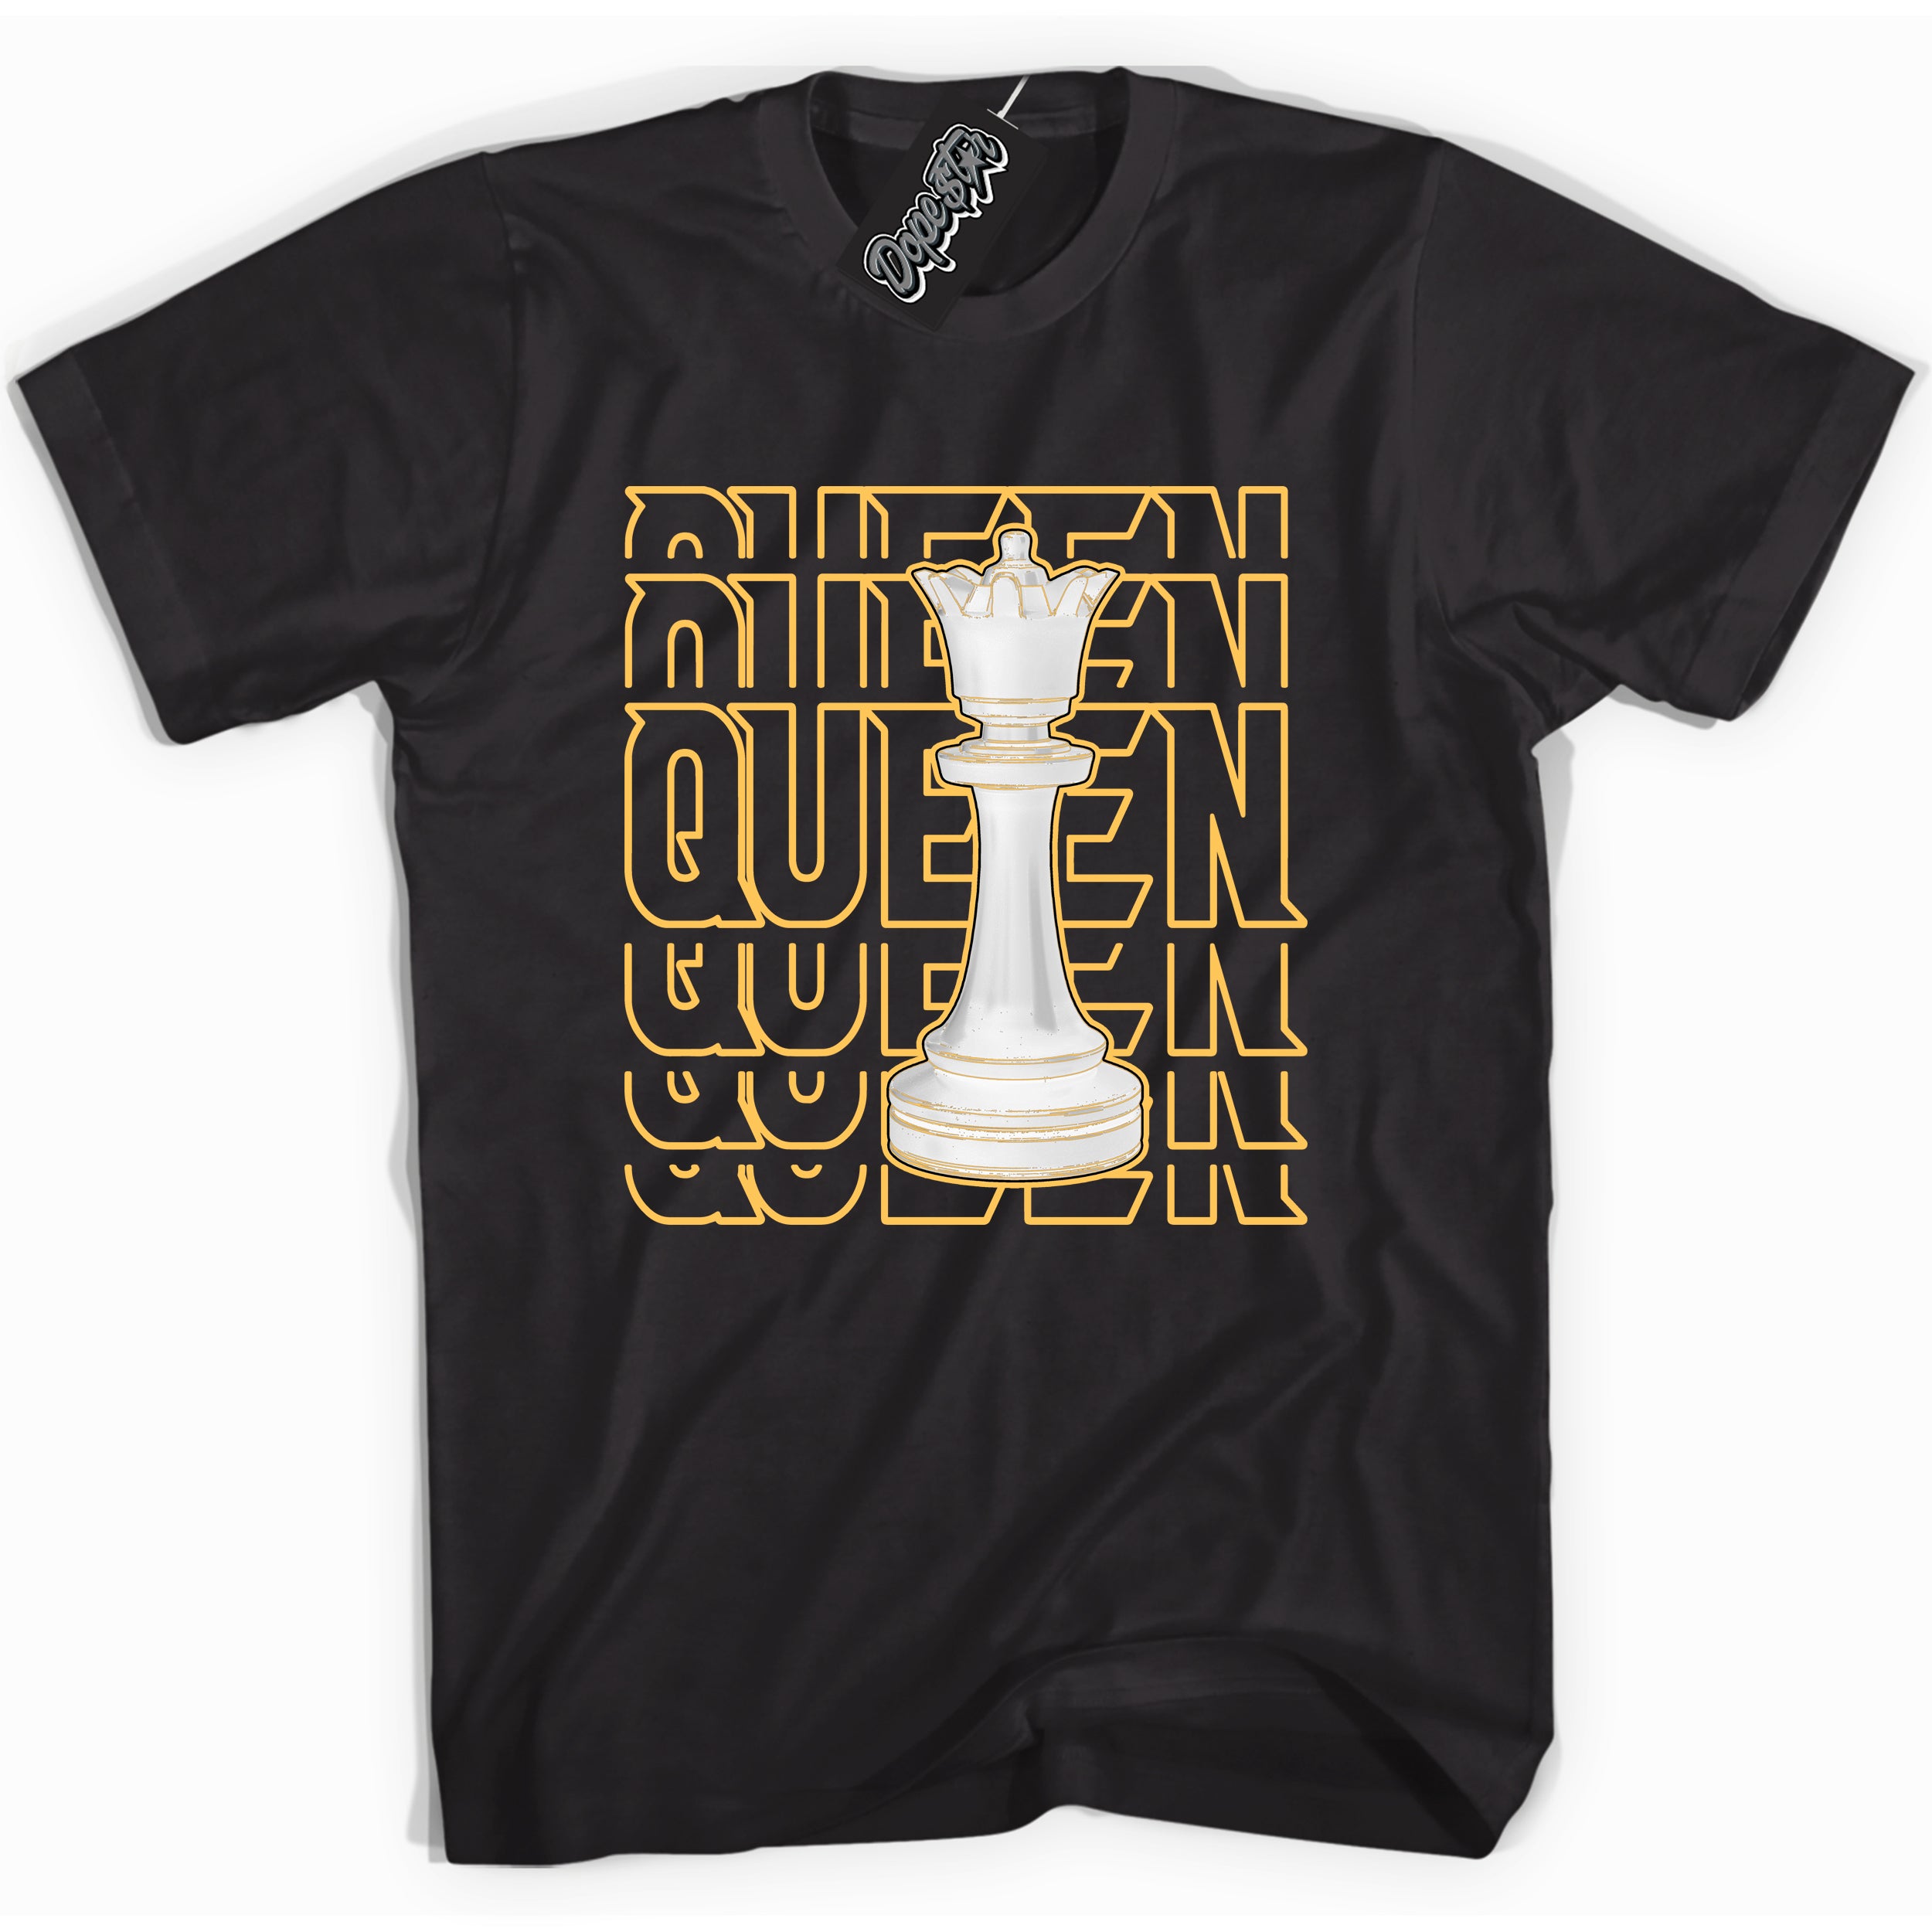 Cool Black Shirt with “ Queen Chess ” design that perfectly matches Yellow Ochre 6s Sneakers.